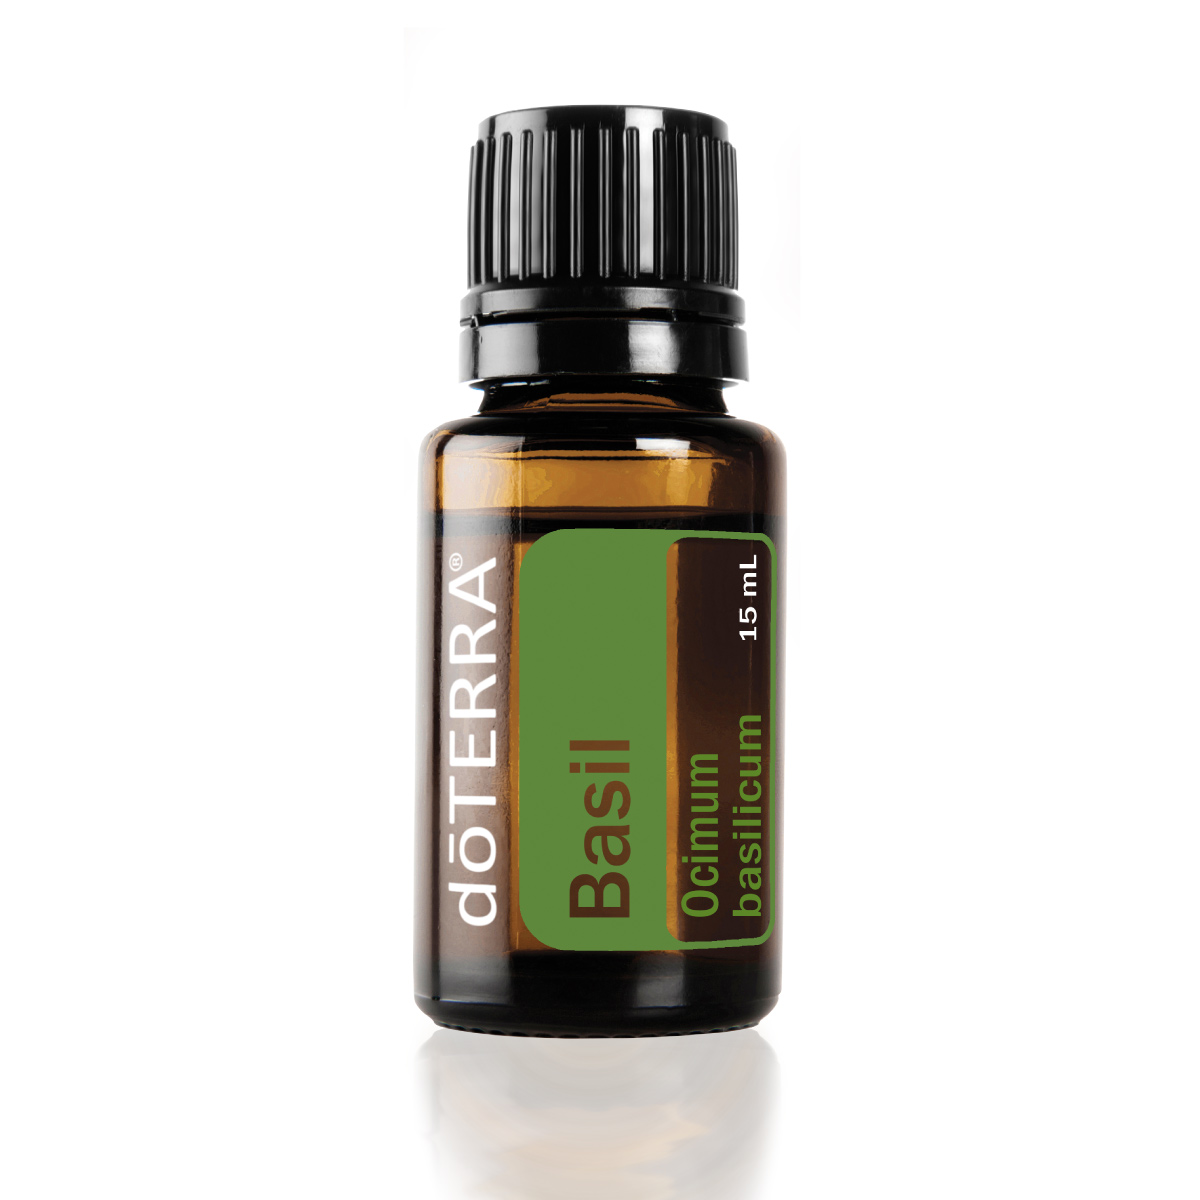 How is Basil oil made? doTERRA Basil oil is made by steam distilling the leaves of the basil plant.